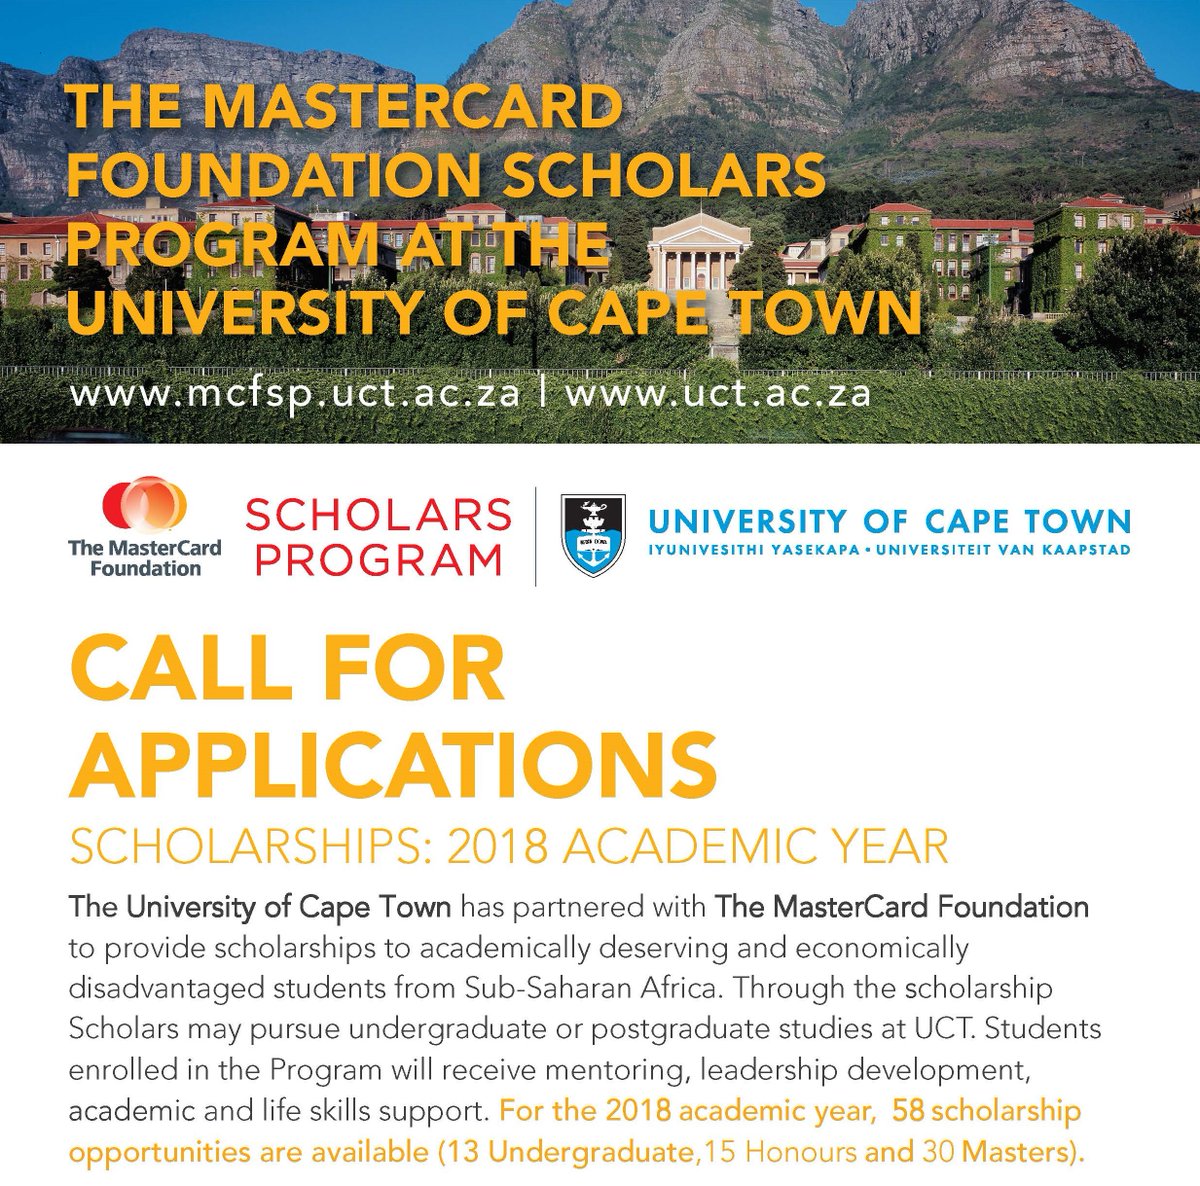 University of Cape Town MasterCard Foundation Scholars Program 2018 for study in South Africa (Fully Funded)